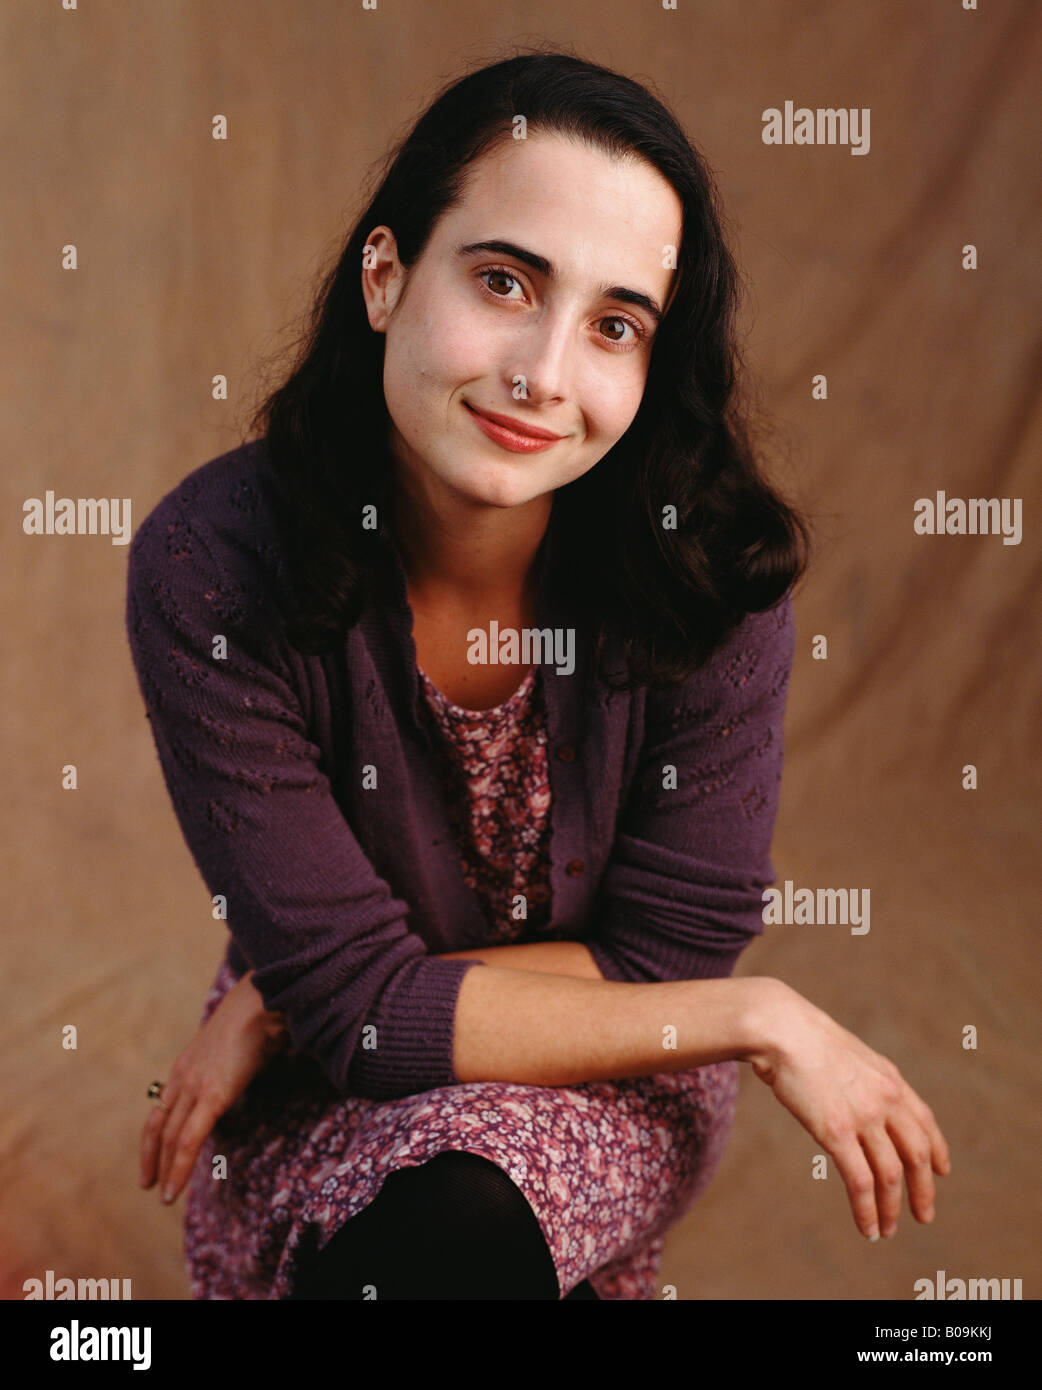 A studio portrait of a woman in her thirties smiling Stock Photo